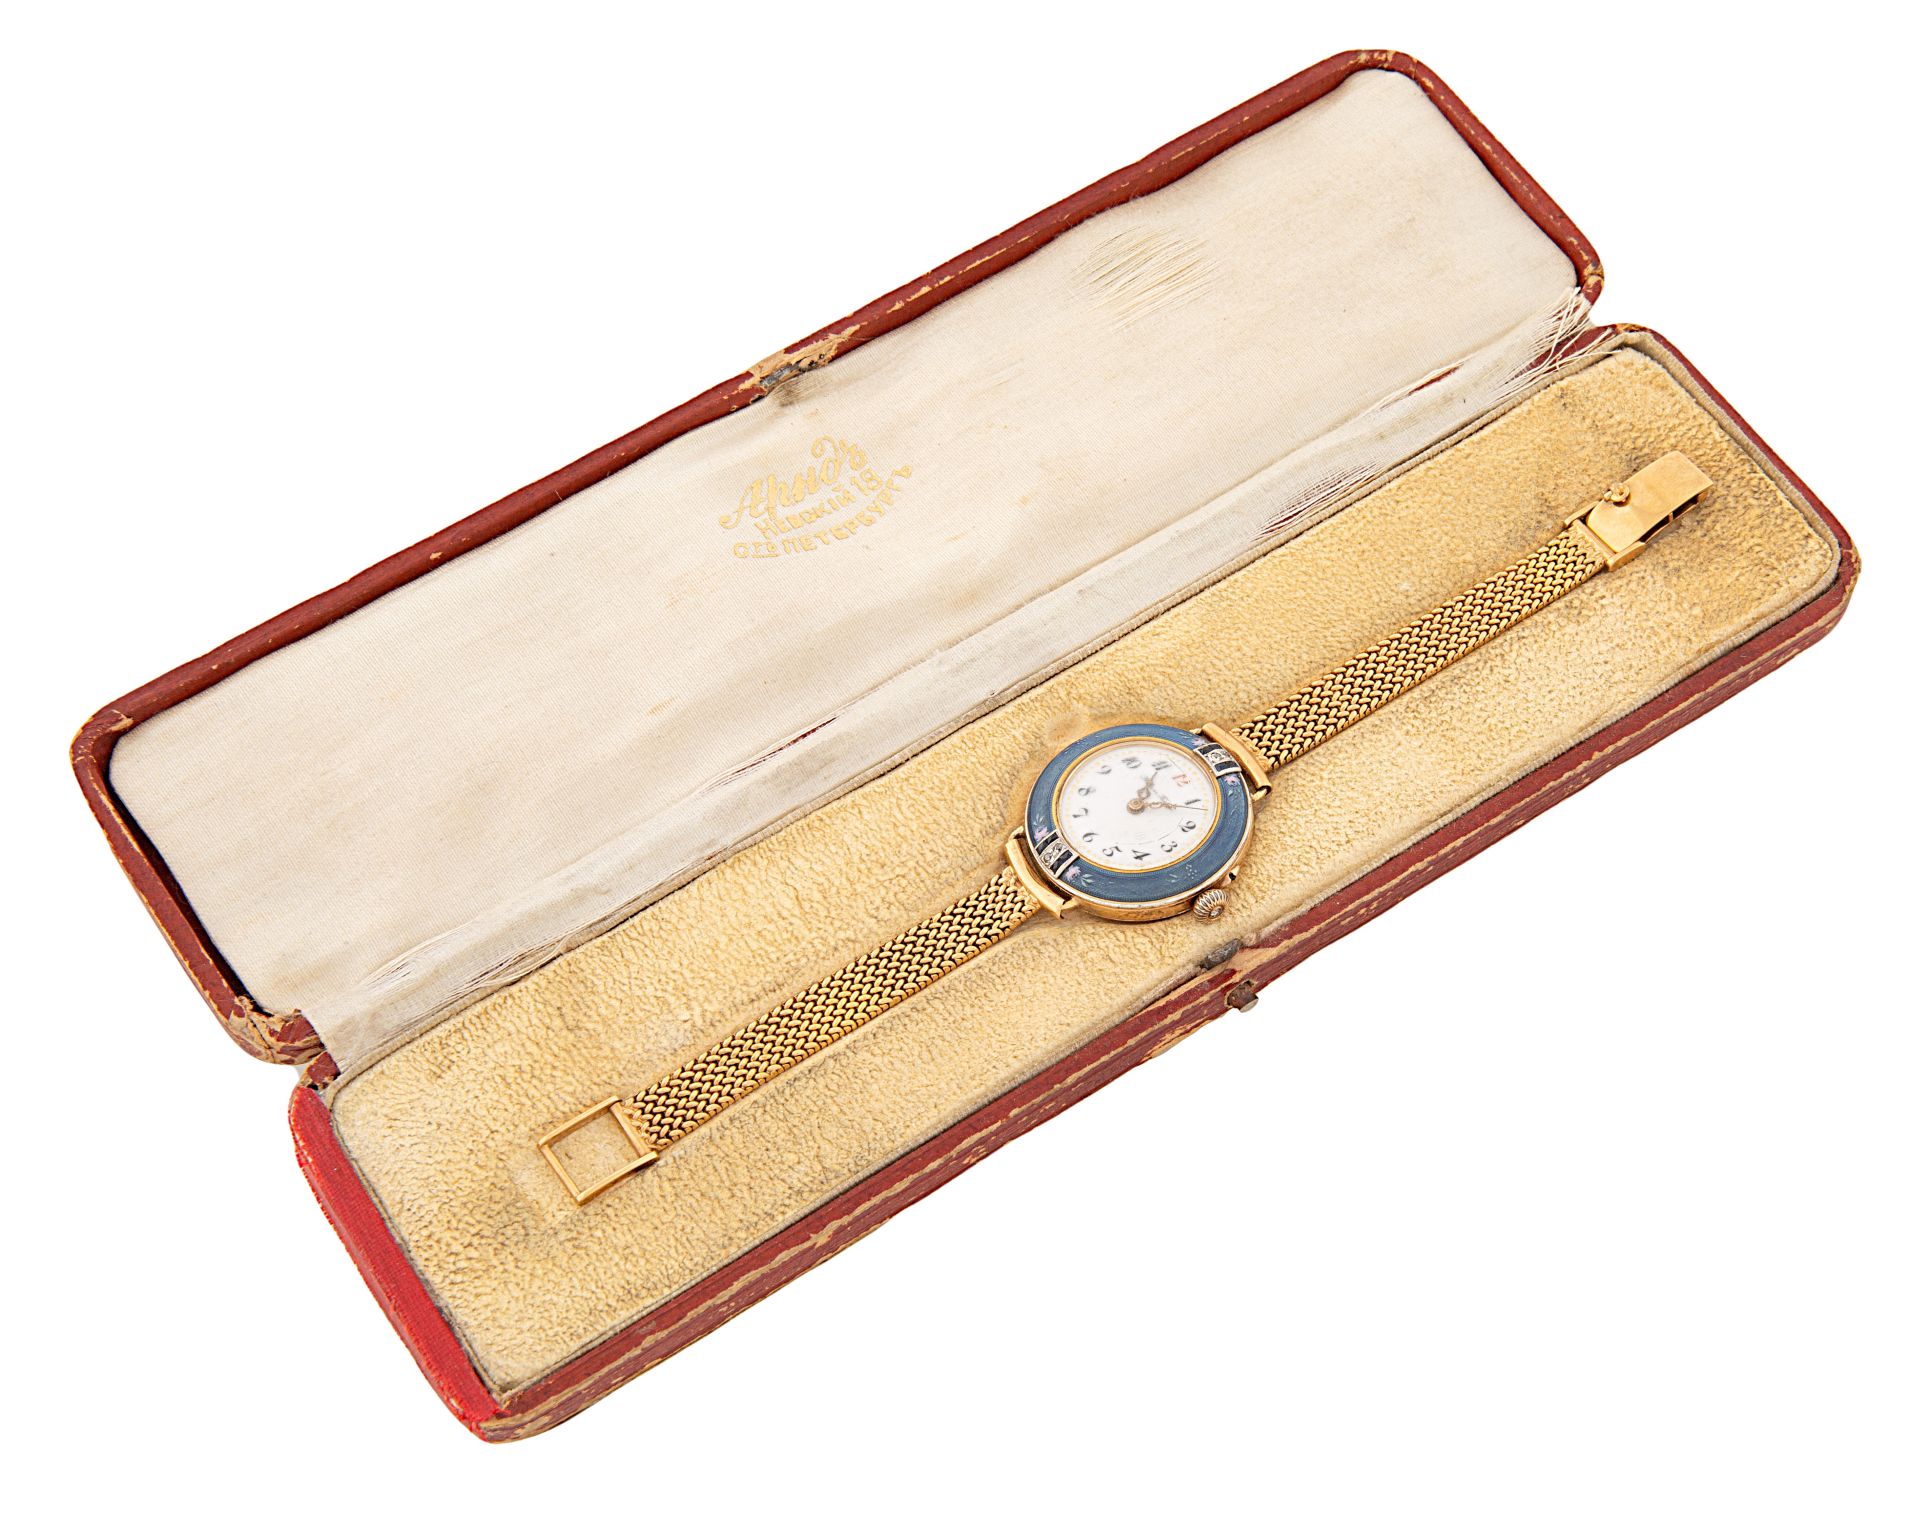 A RUSSIAN GOLD AND ENAMEL WOMEN'S WRISTWATCH, PAVEL BUHRE, ST. PETERSBURG, CASE NO. 159'690, CIRCA 1